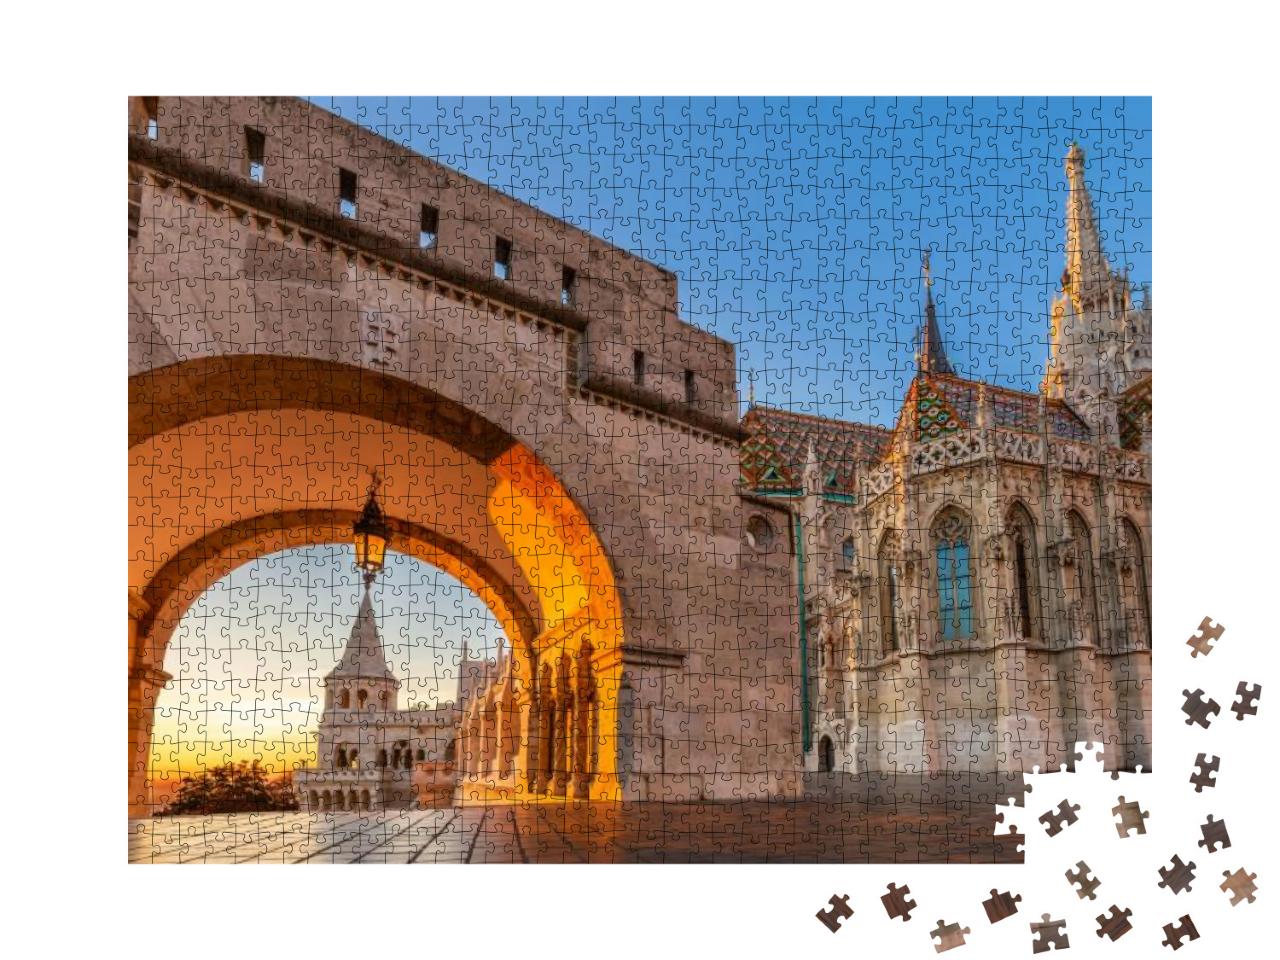 Budapest, Hungary - North Gate of the Fishermans Bastion... Jigsaw Puzzle with 1000 pieces